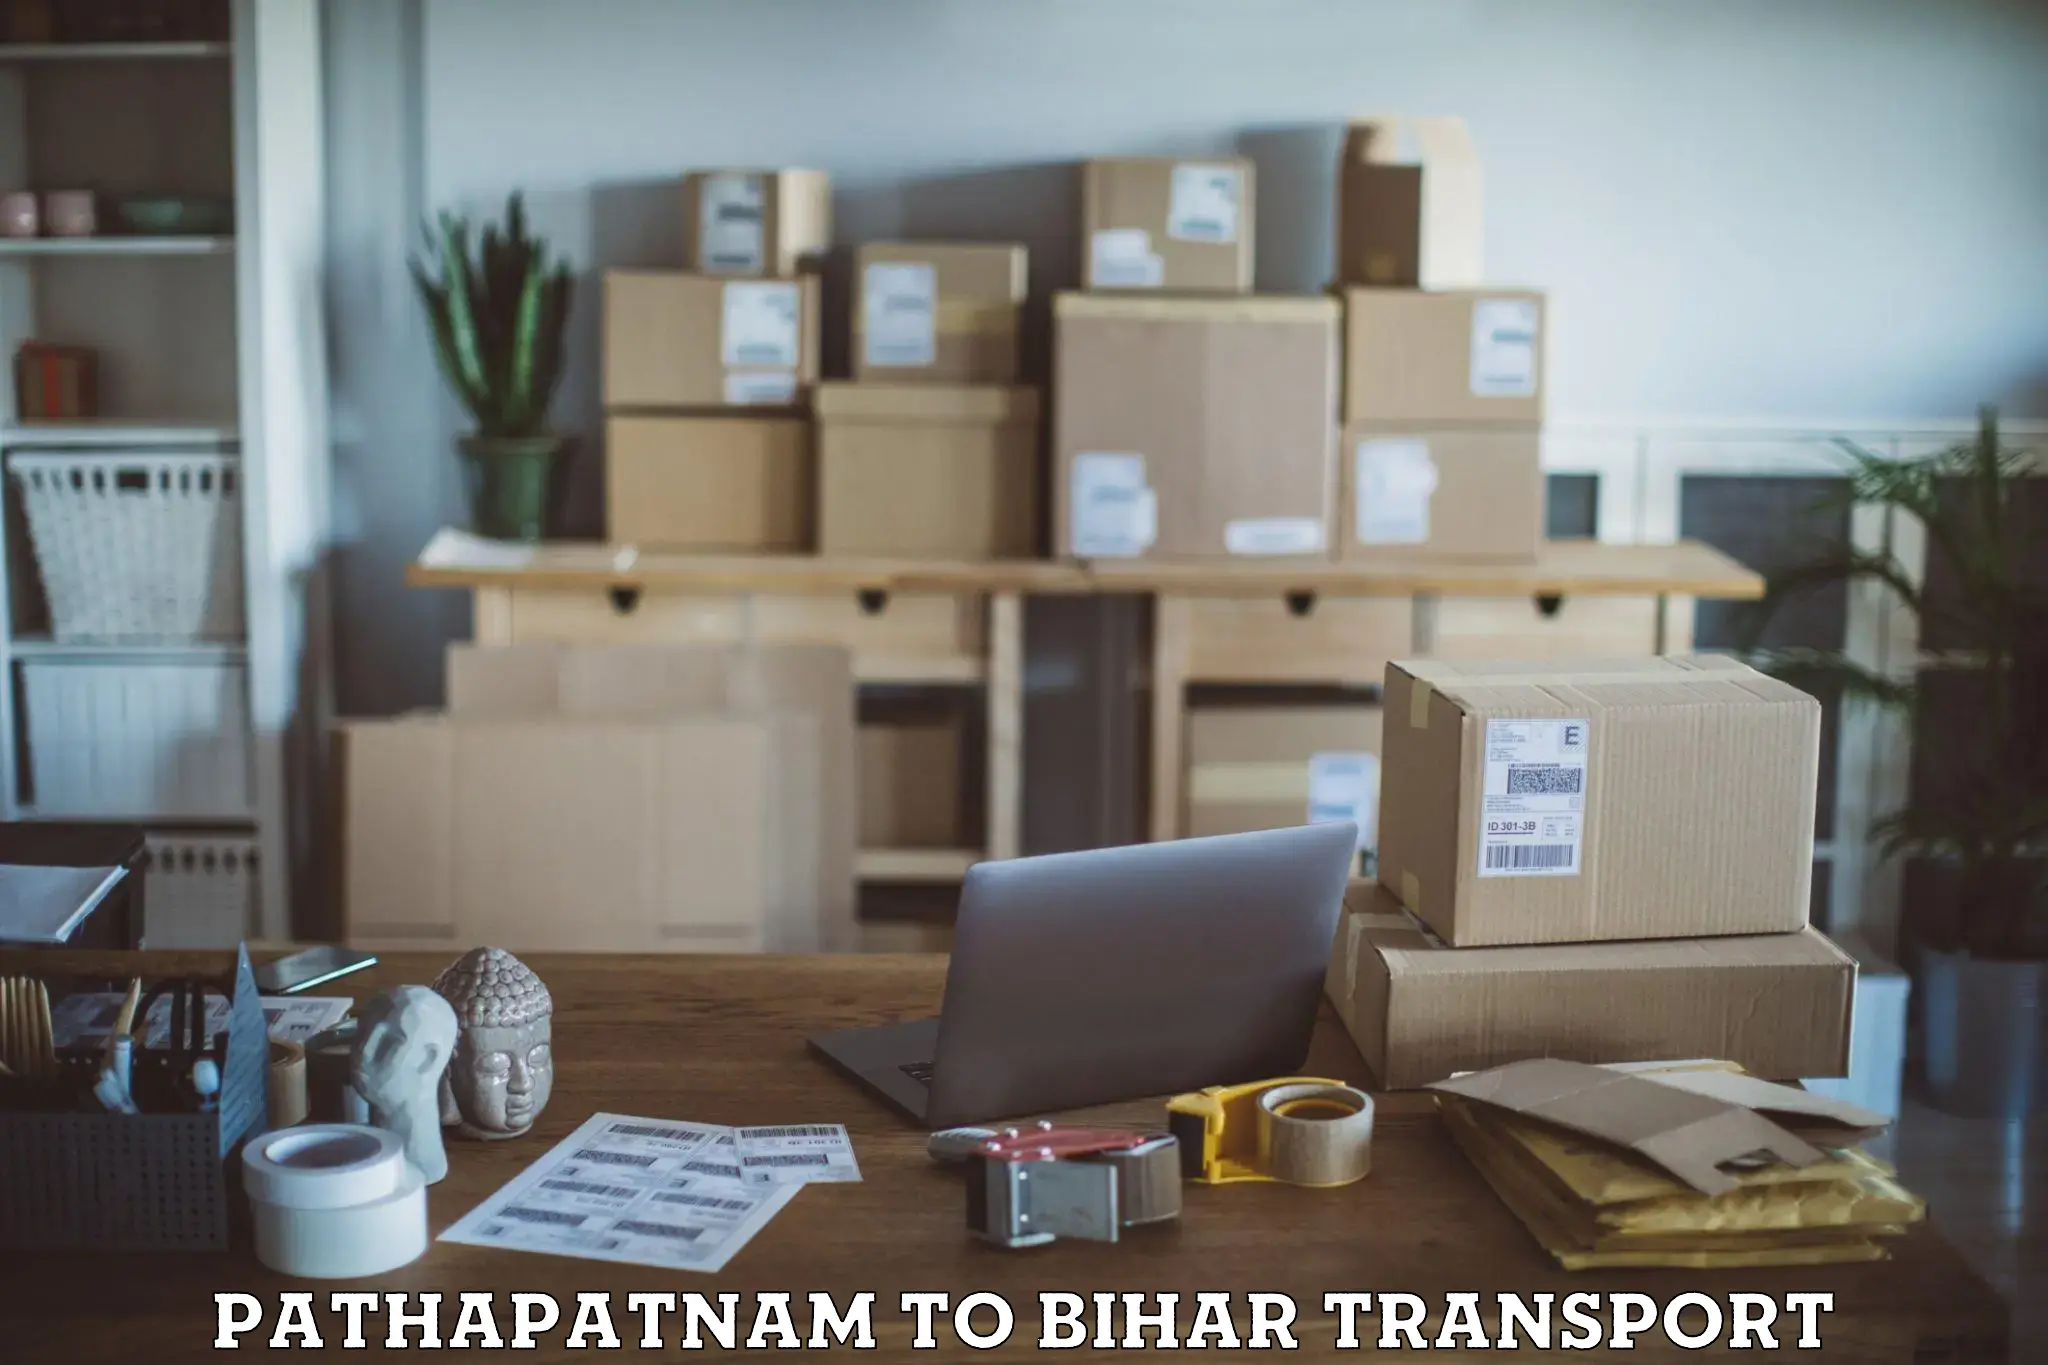 Land transport services Pathapatnam to IIT Patna